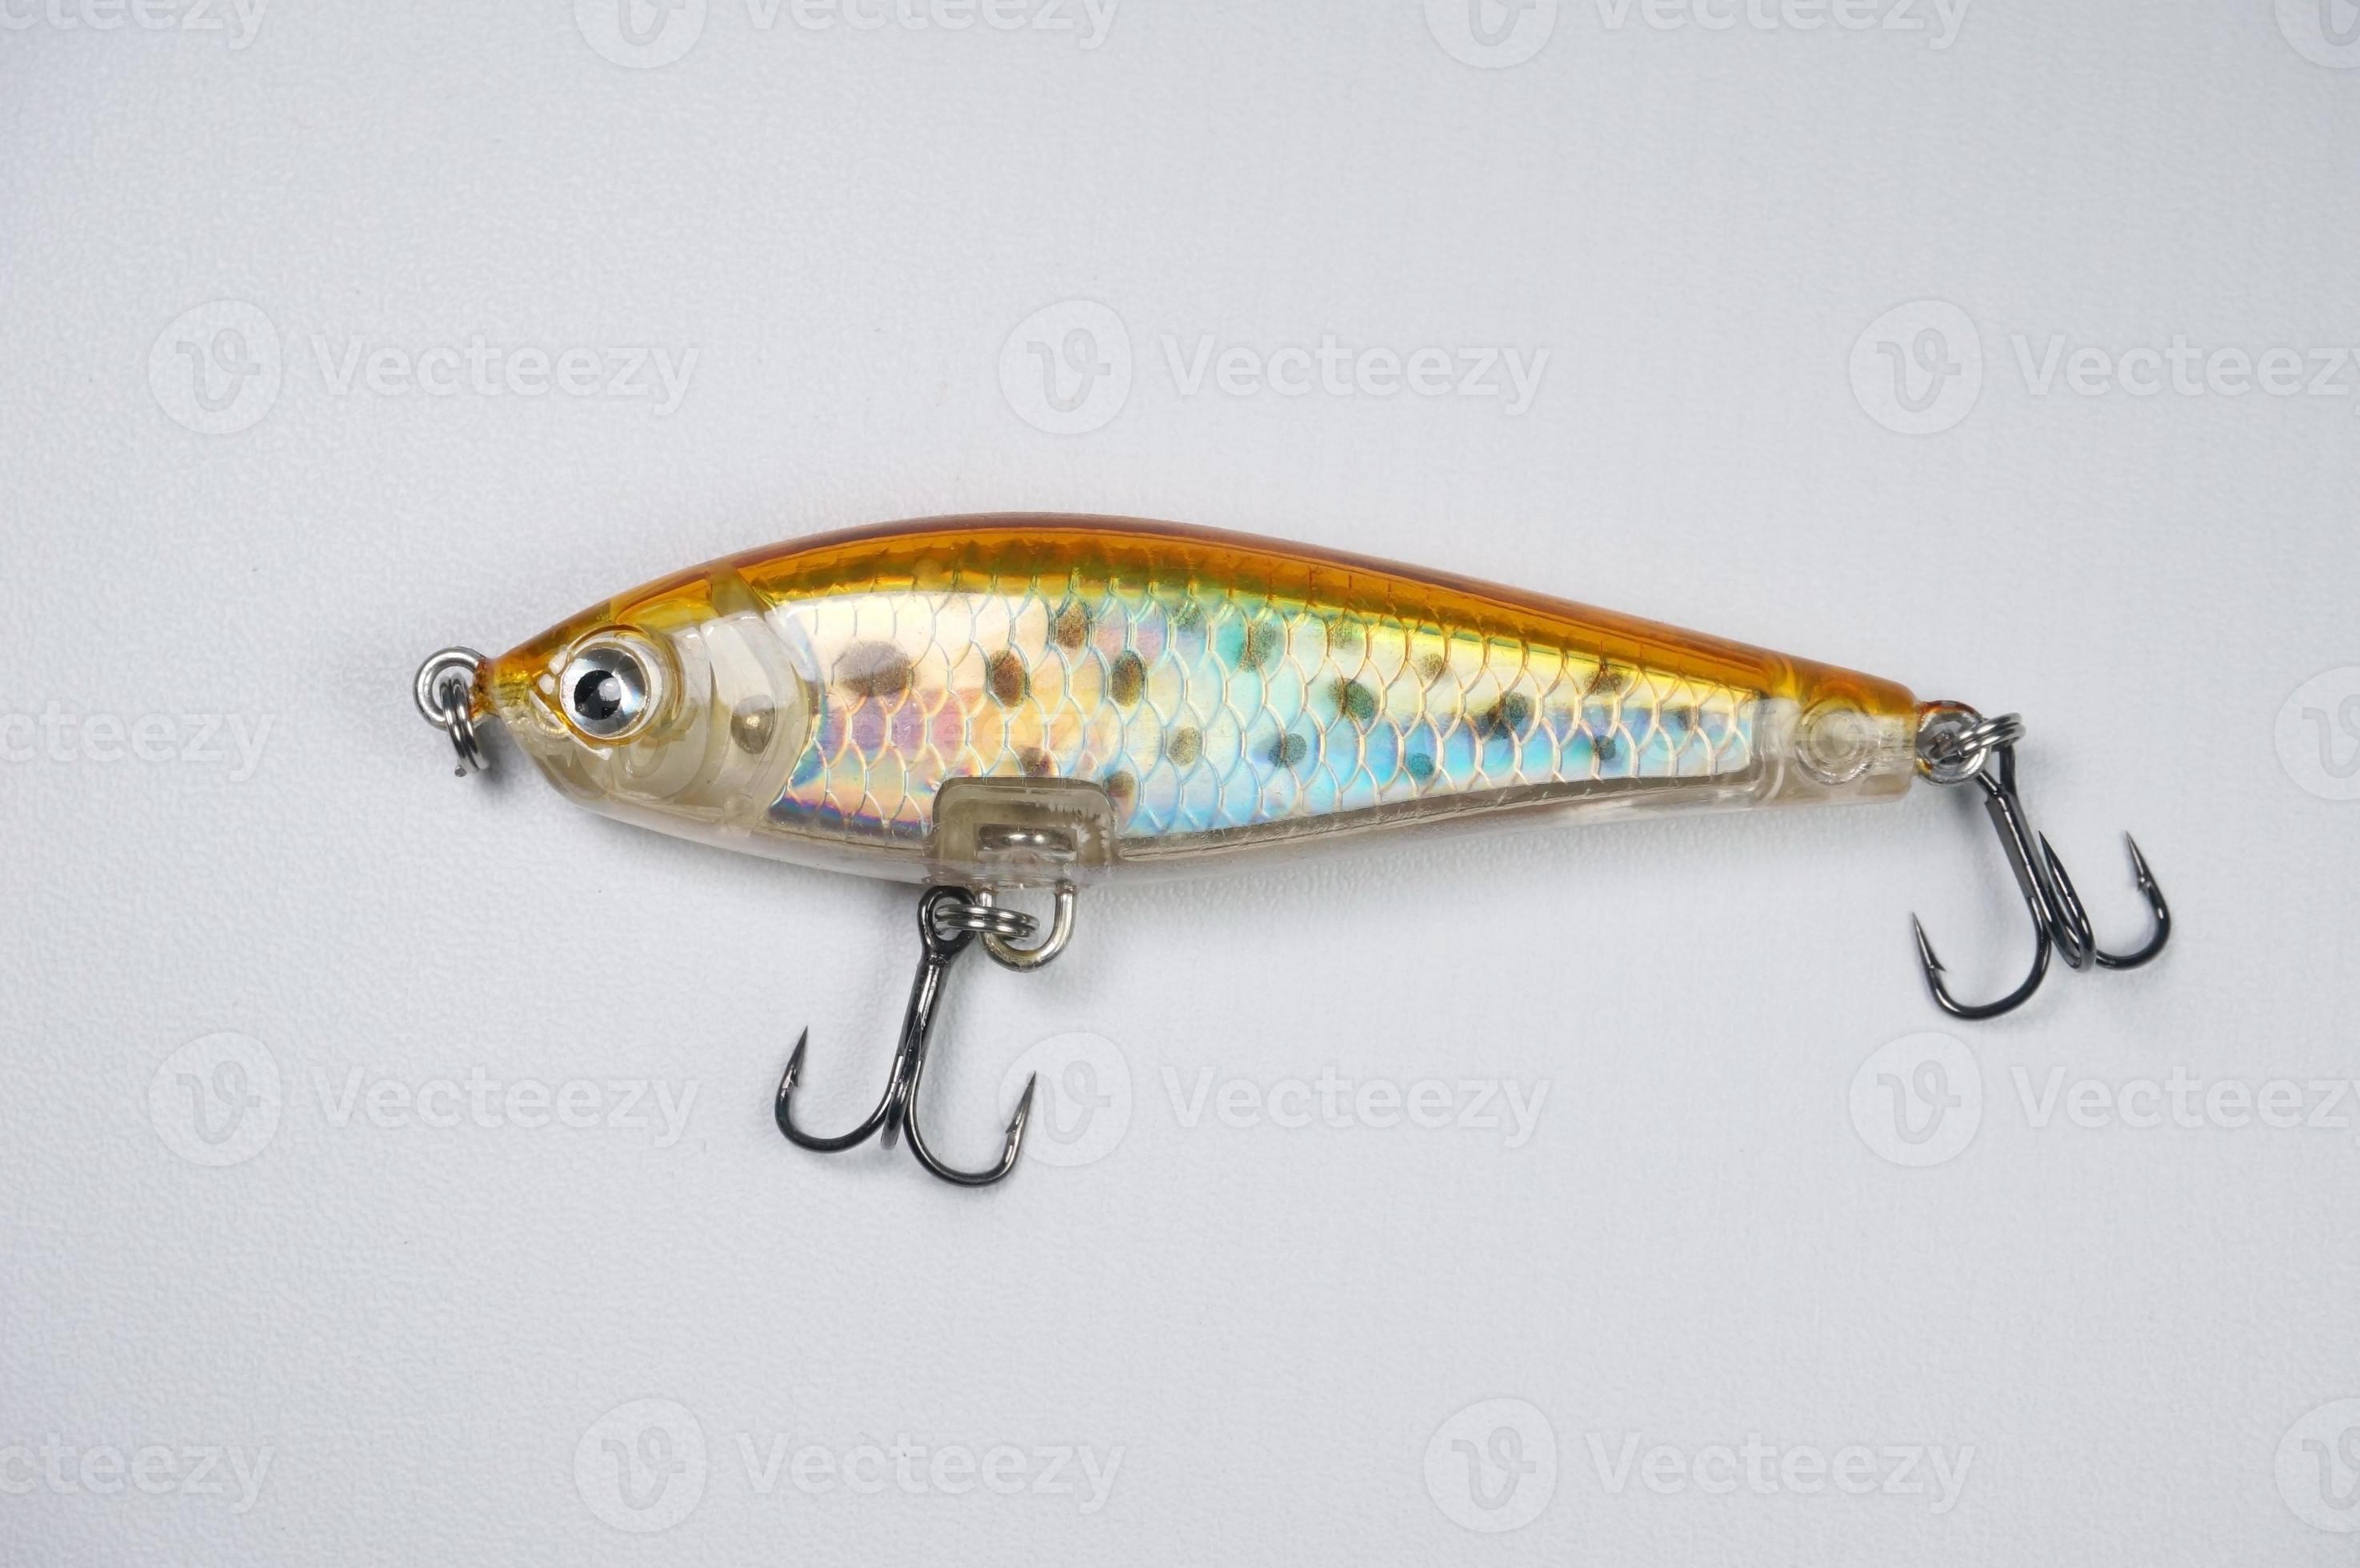 https://static.vecteezy.com/system/resources/previews/014/199/478/large_2x/plastic-fishing-lure-on-a-white-background-lure-floating-photo.jpg